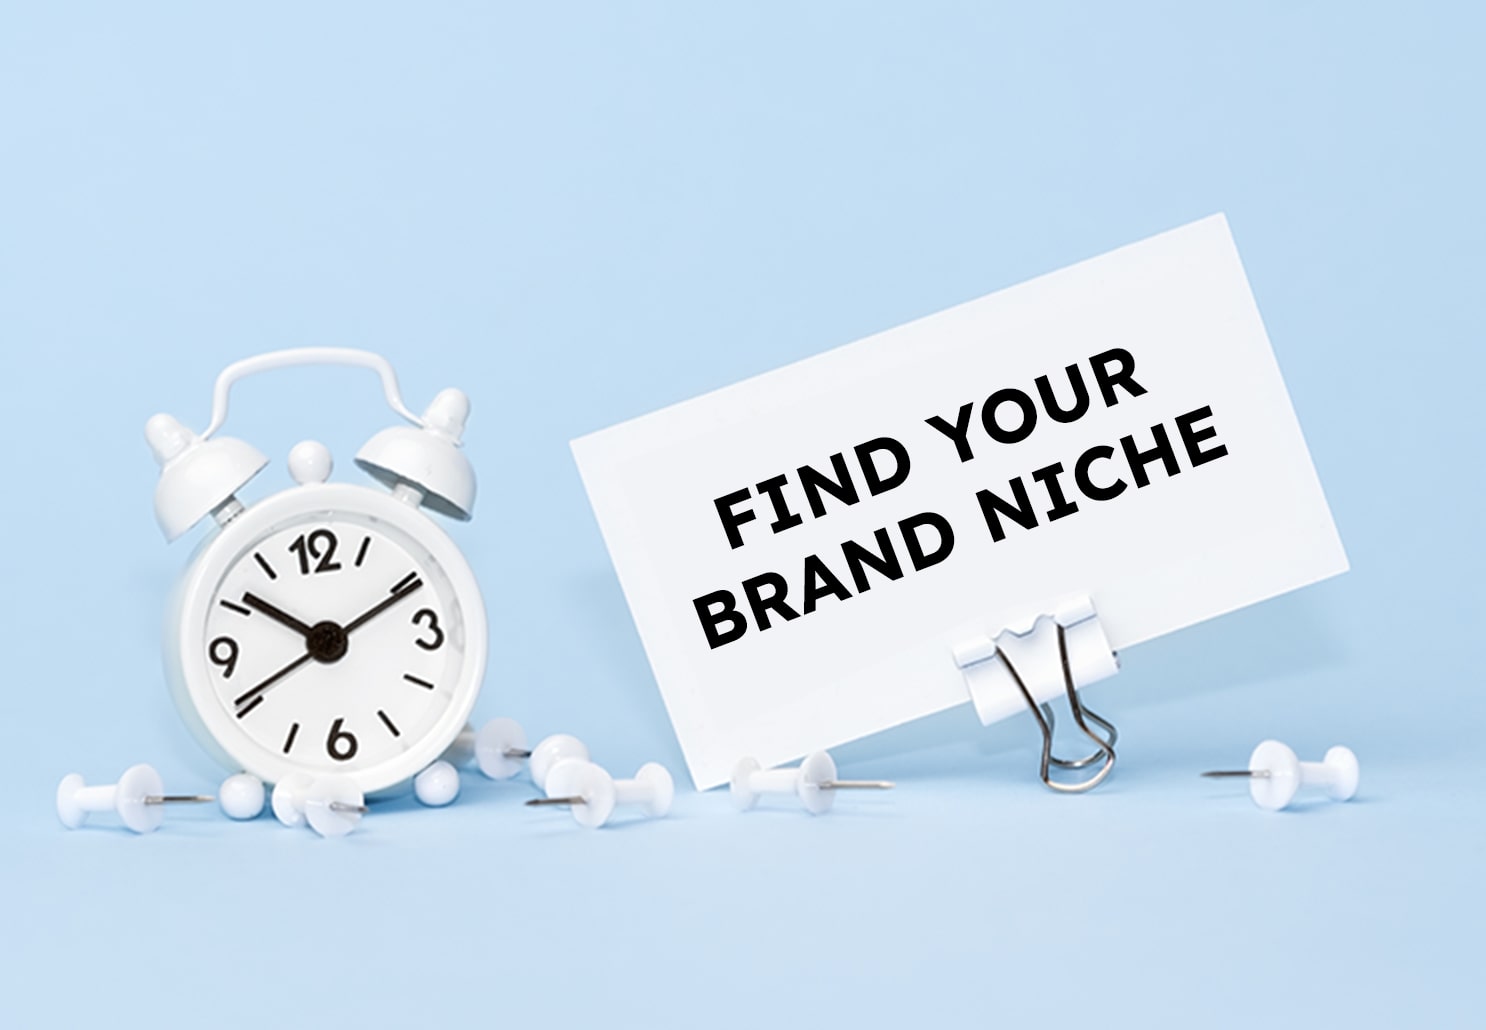 4 easy techniques to find your brand niche